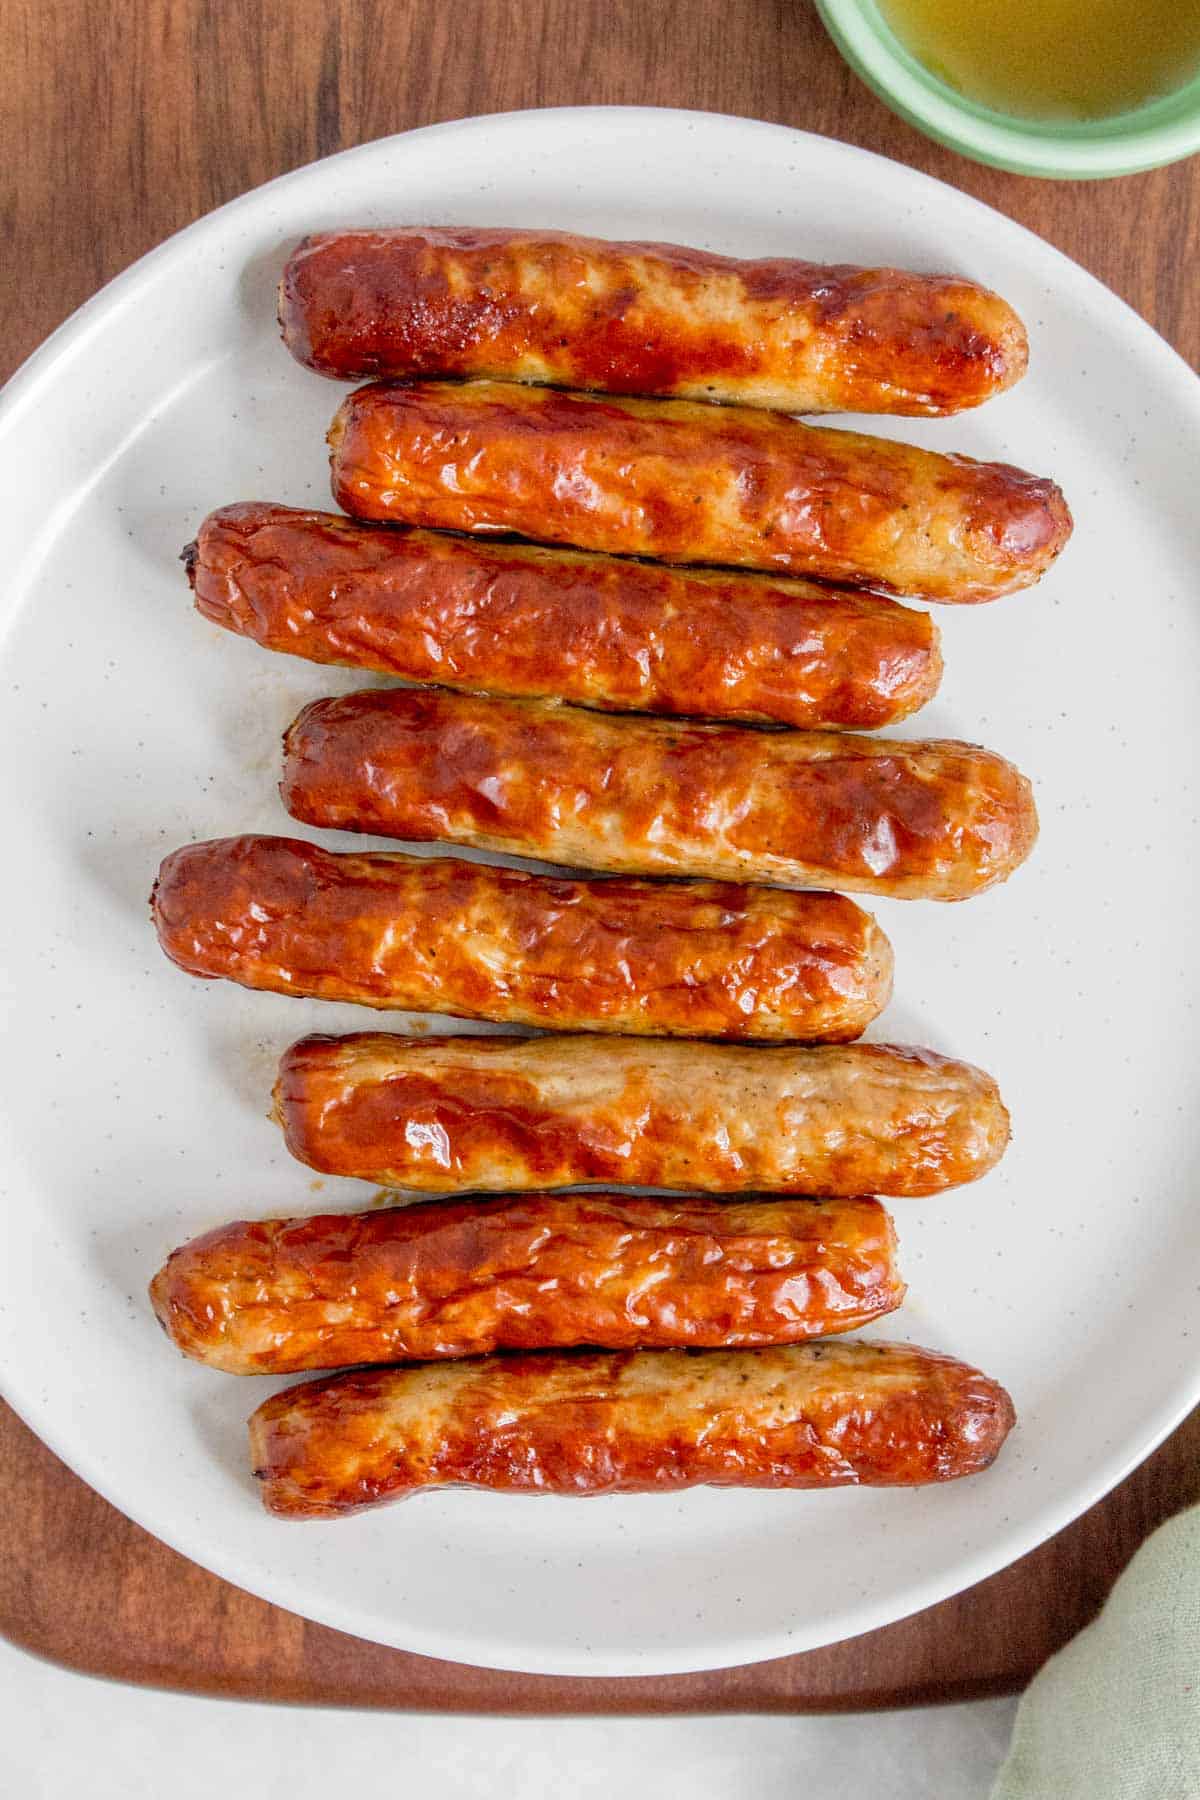 Overhead view of a plate of air fryer breakfast sausages.